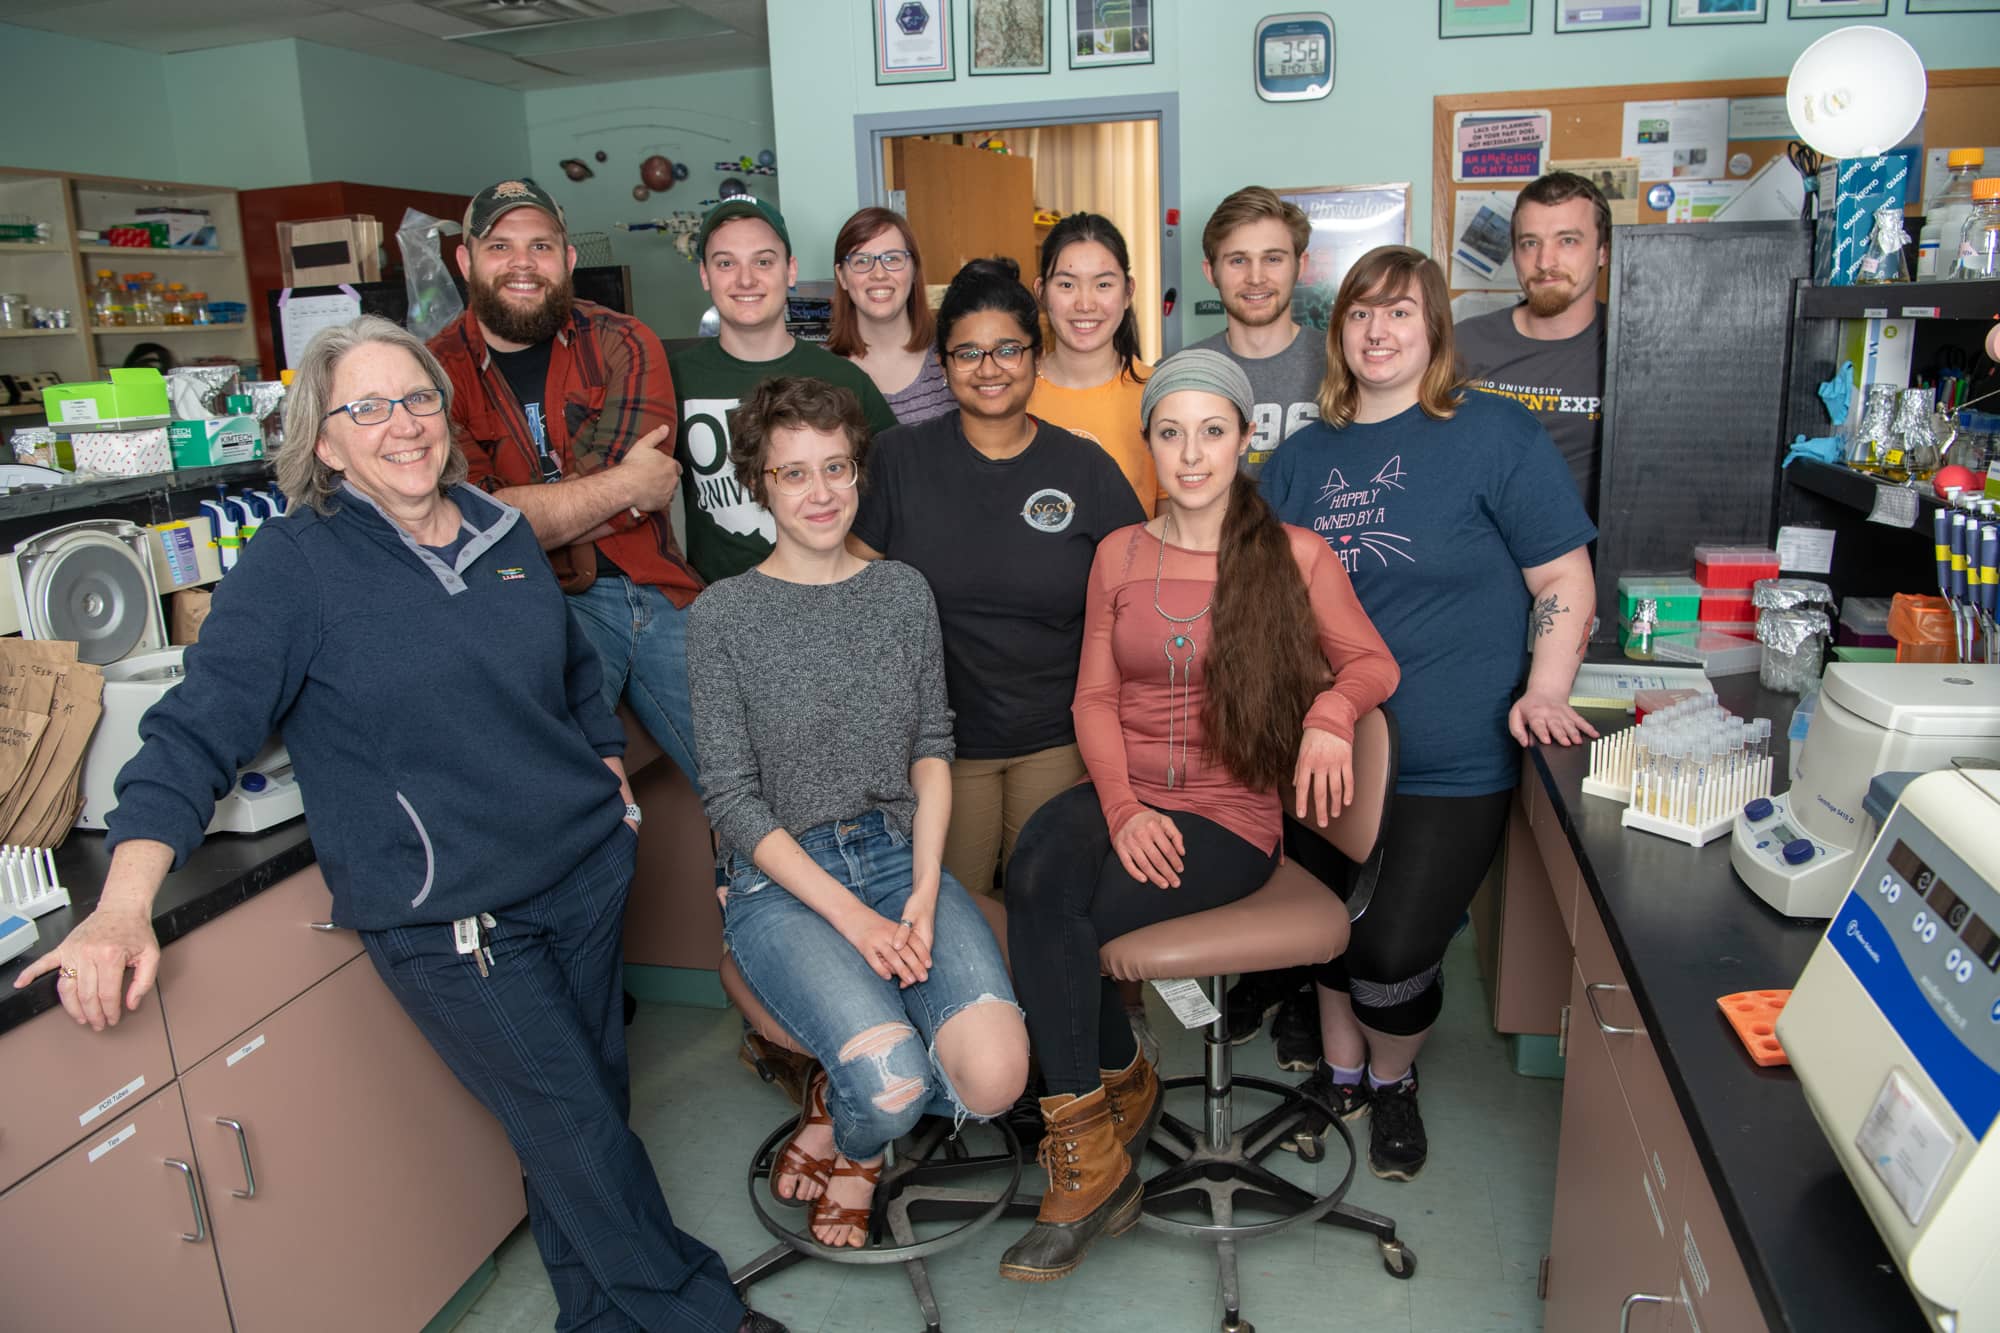 Sarah Wyatt, Ph.D., left, is photographed with her team in her lab at Porter Hall.